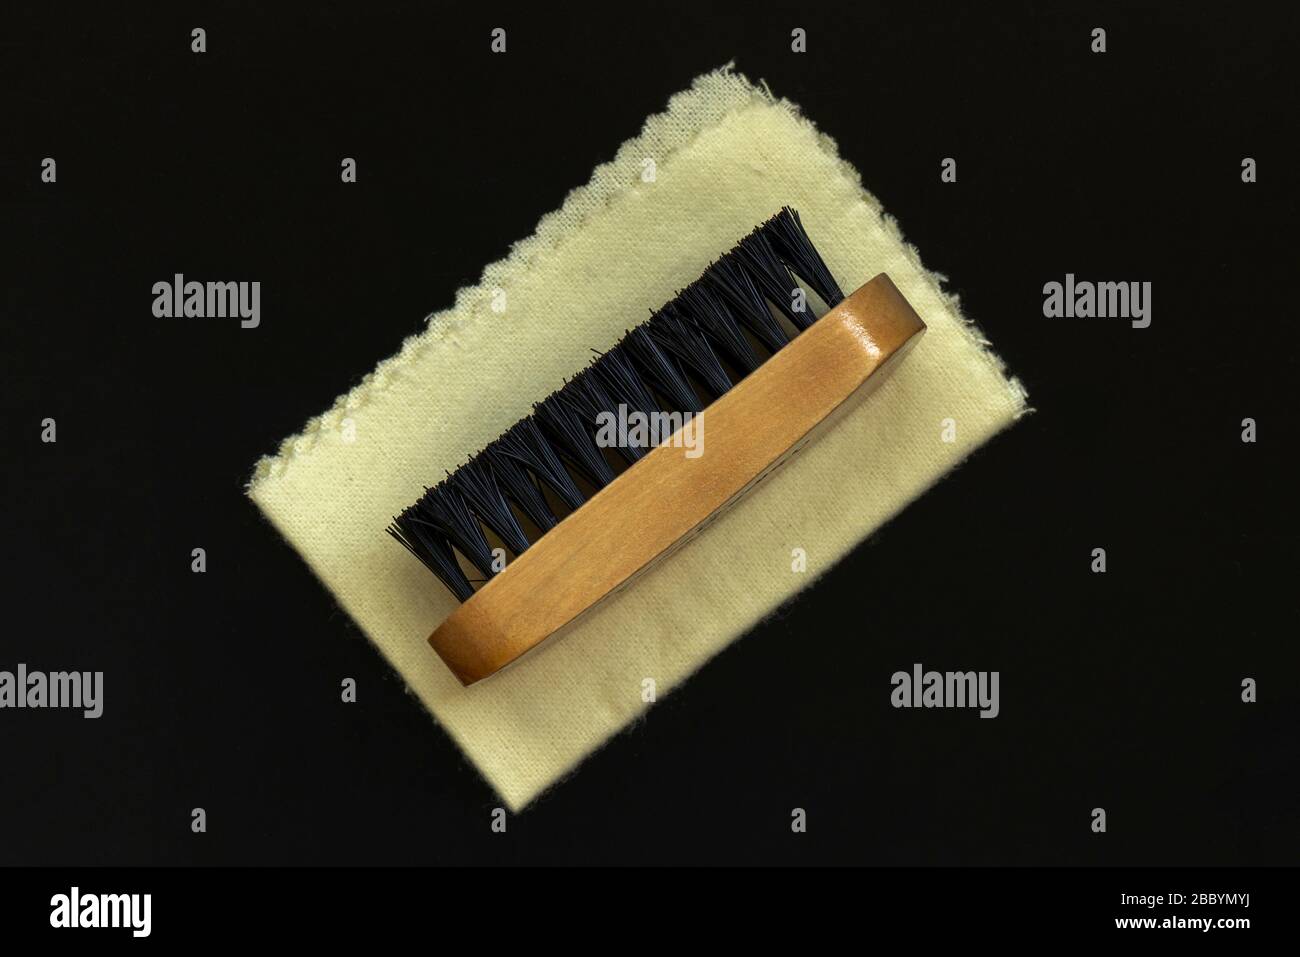 Brush and soft cloth as boot care kit or shoe shine kit accessories on black background from above. Stock Photo